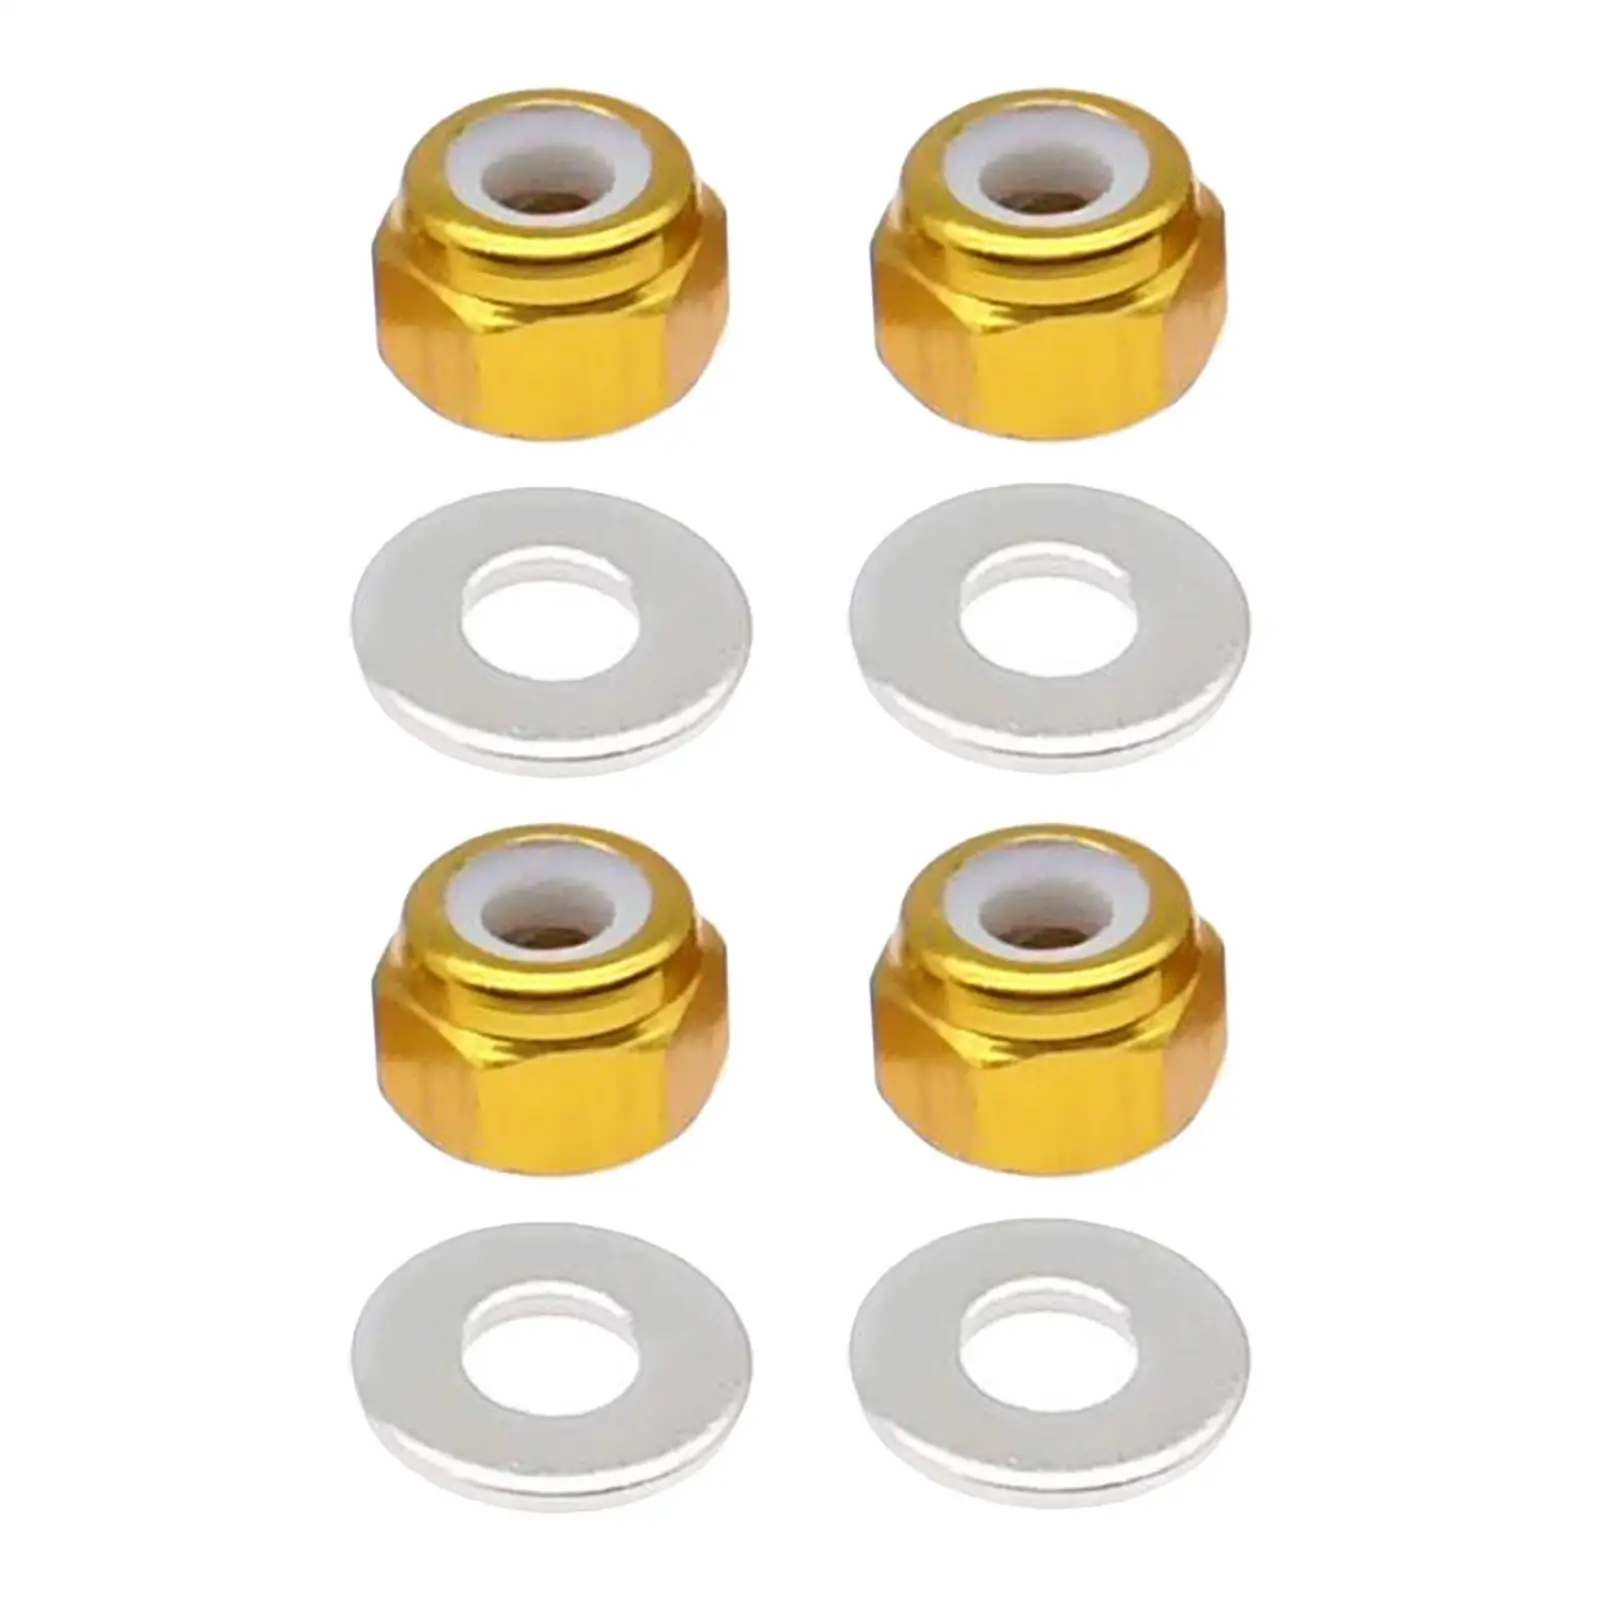 8x 3mm Wheel Nut Metal Wheel Hardware with Gasket for Wltoys 144001 1/14 RC Car Replace Parts